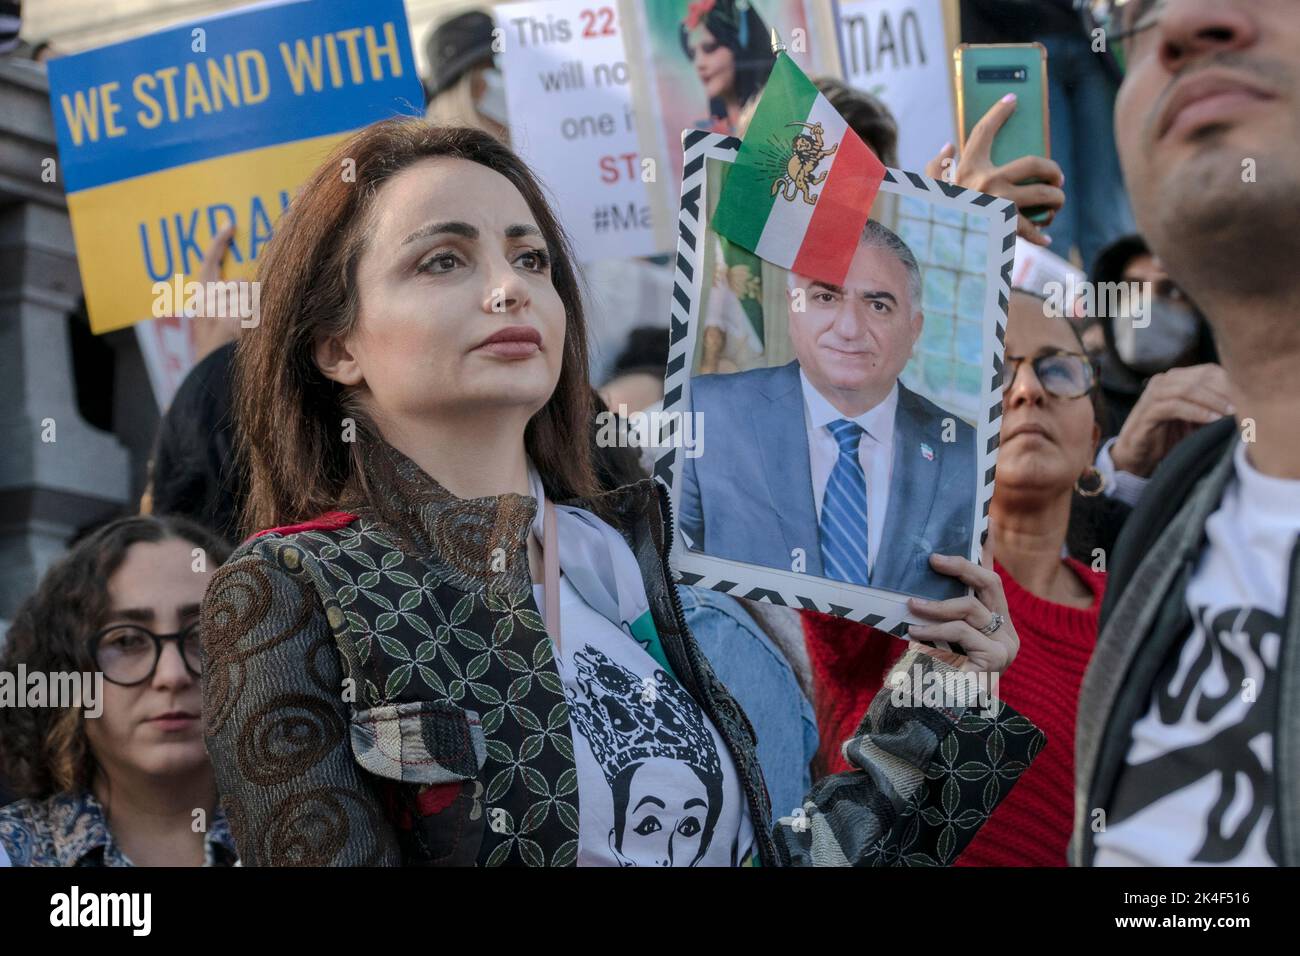 Woman, life, freedom’: London protest over Iran draws thousands to protest after the death of Mahsa Amini in police custody 01-10-2022 Stock Photo